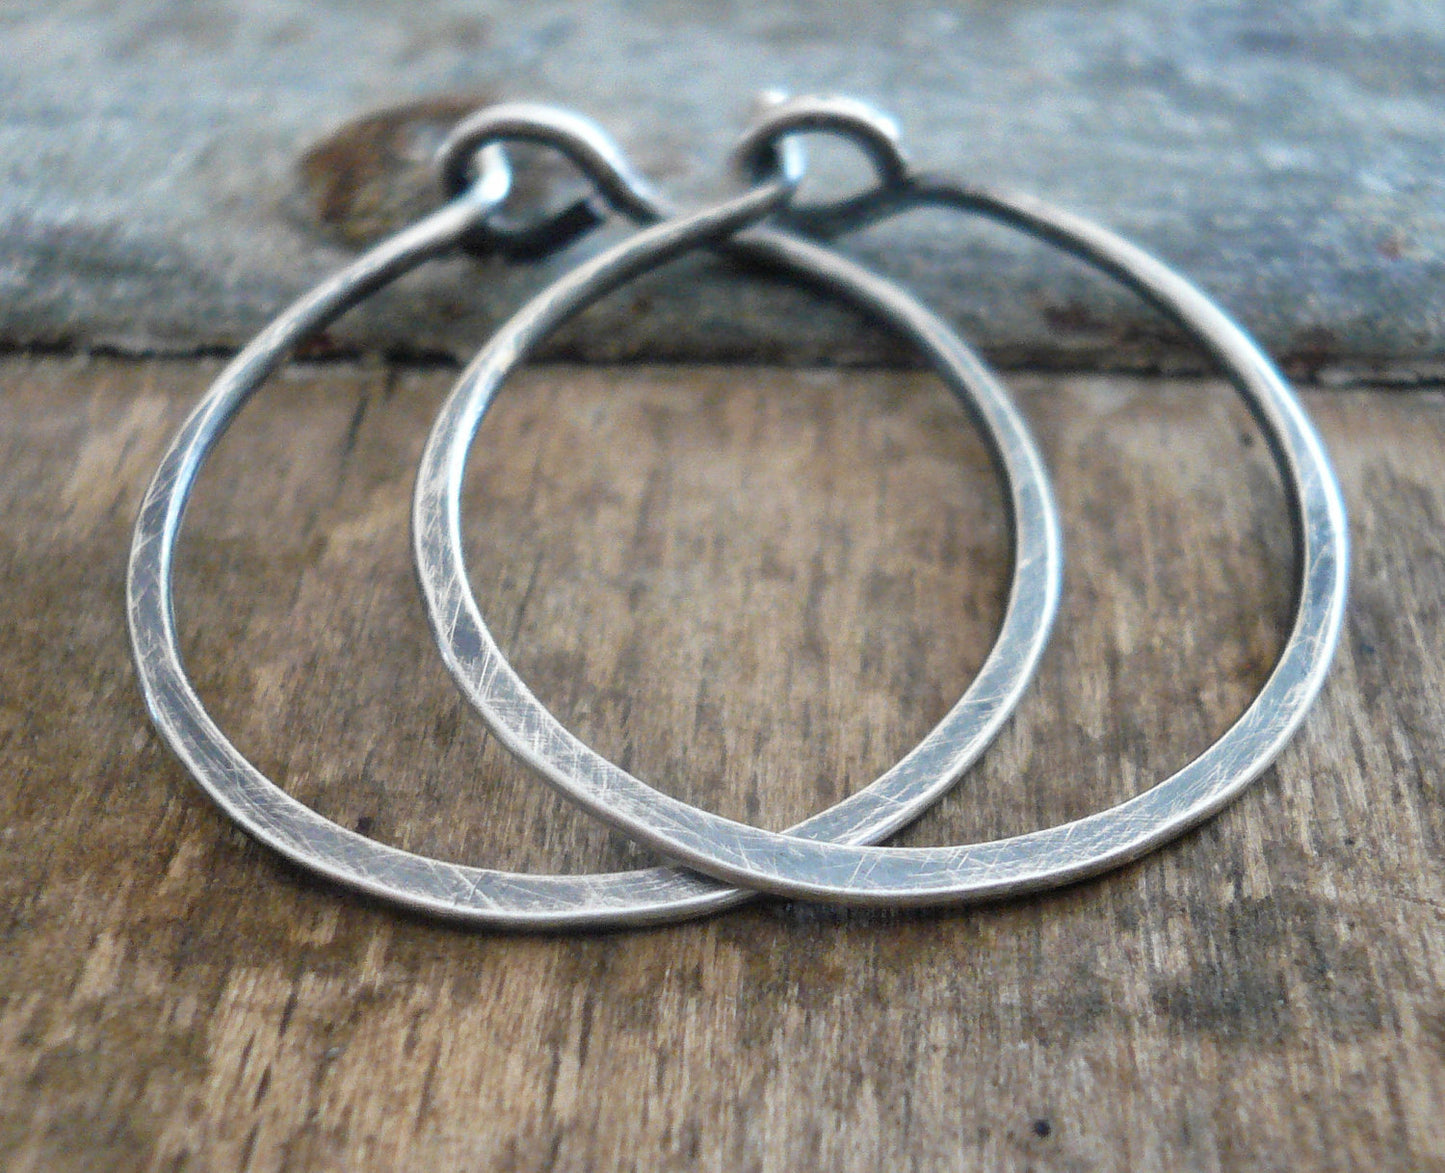 Every Day Hoops - Handmade in Heavily Oxidized Sterling Silver. 4 sizes